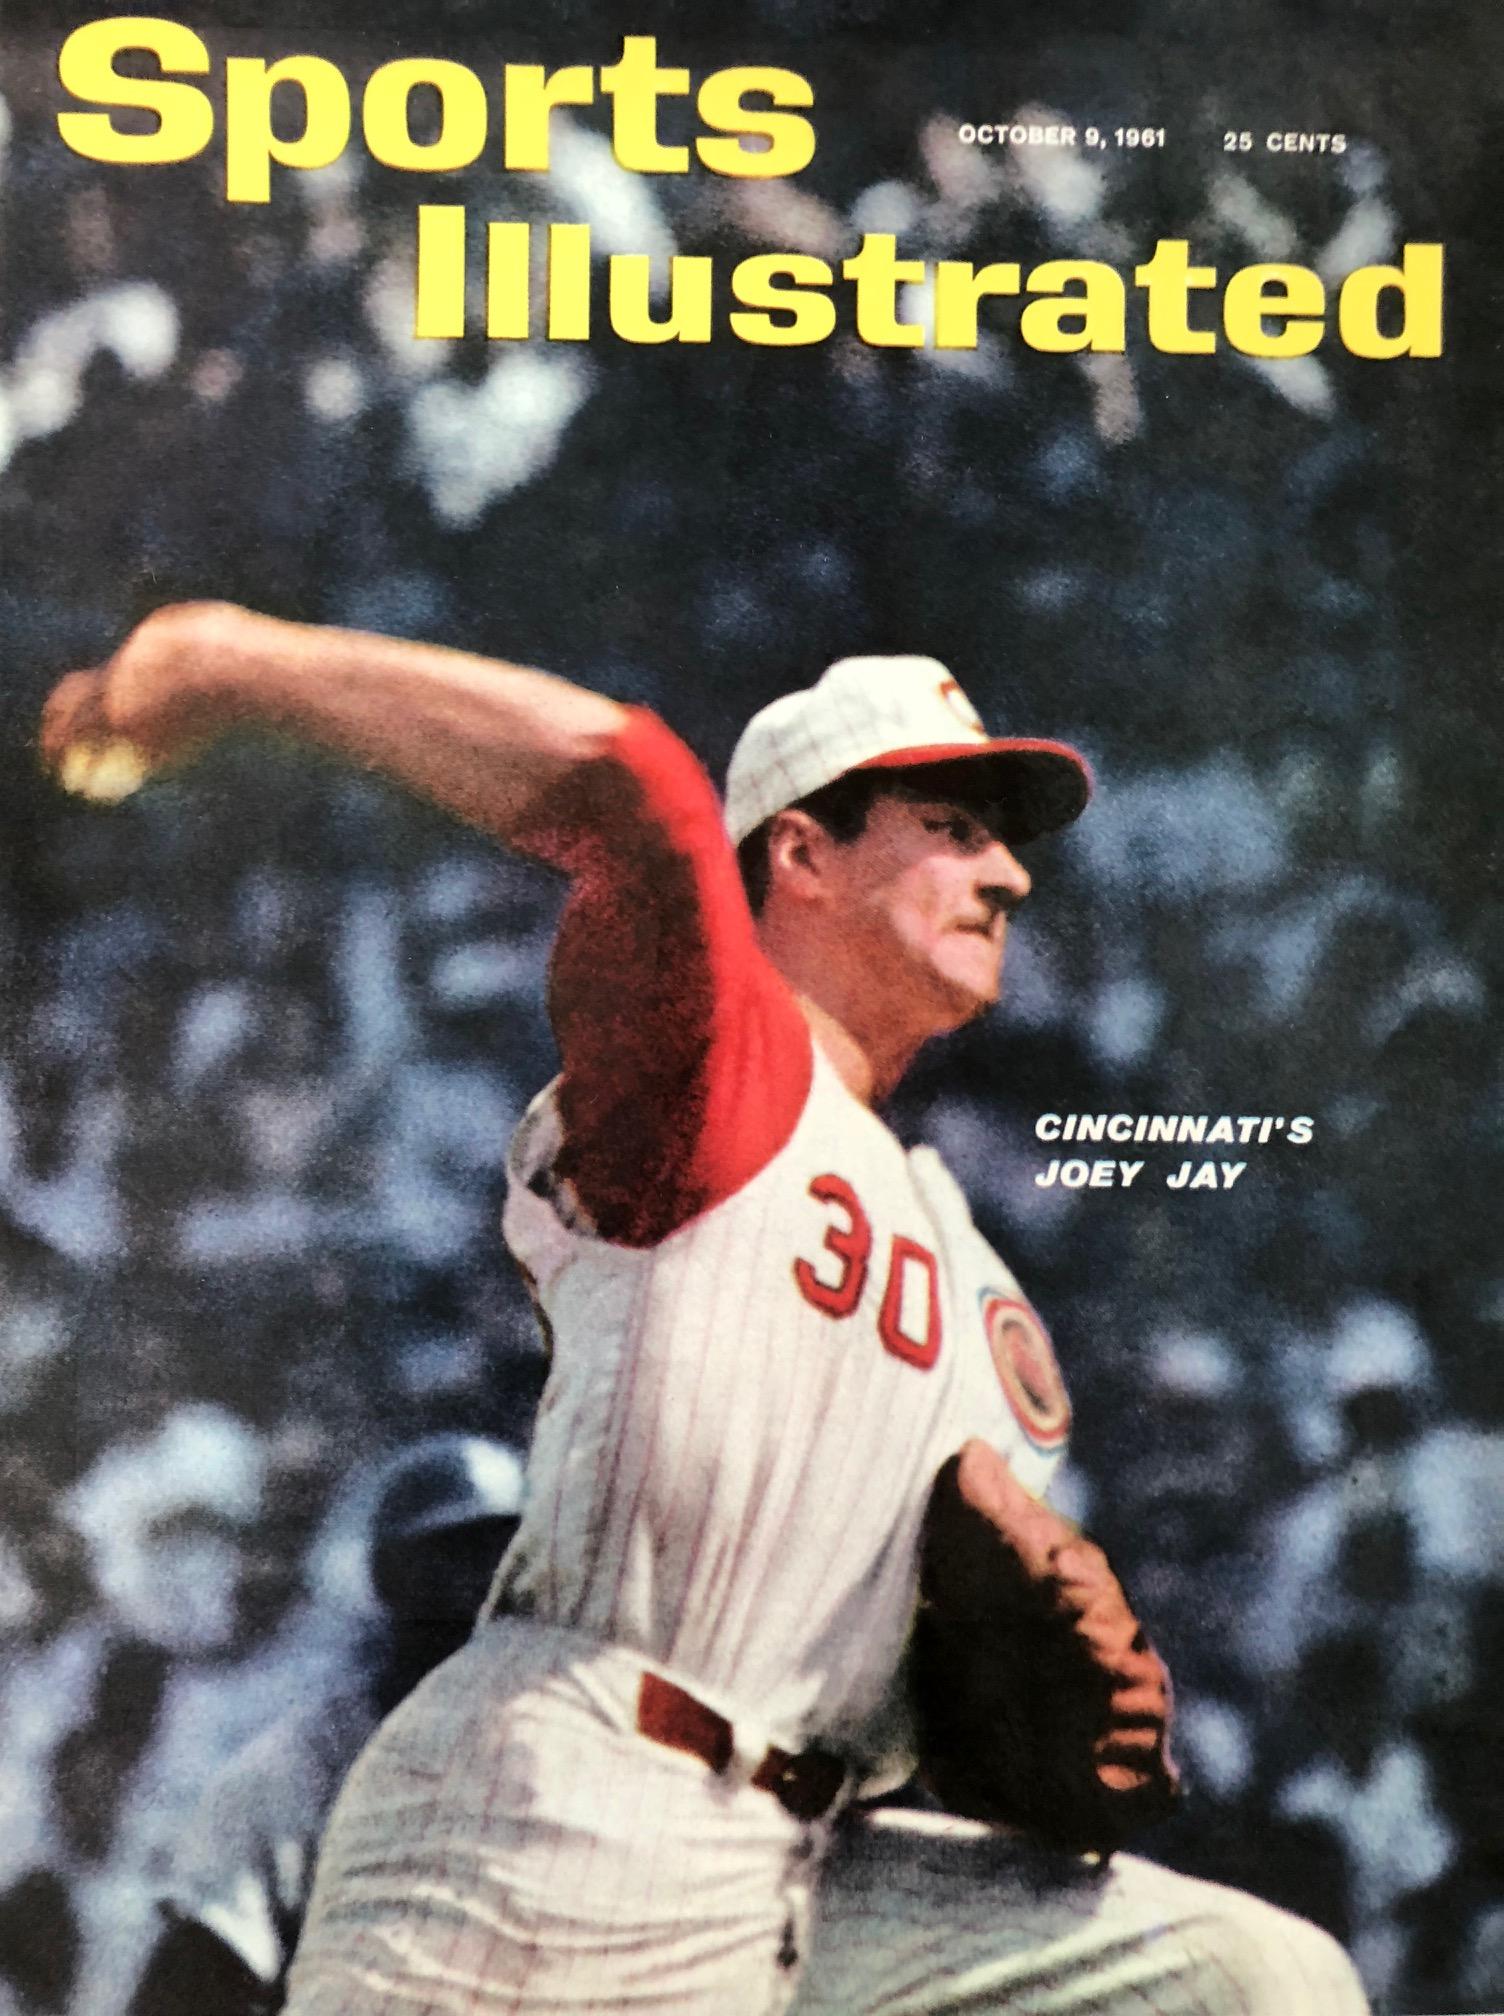 Joey Jay, 1961 Reds' All-Star, became the Reds' first 20-game